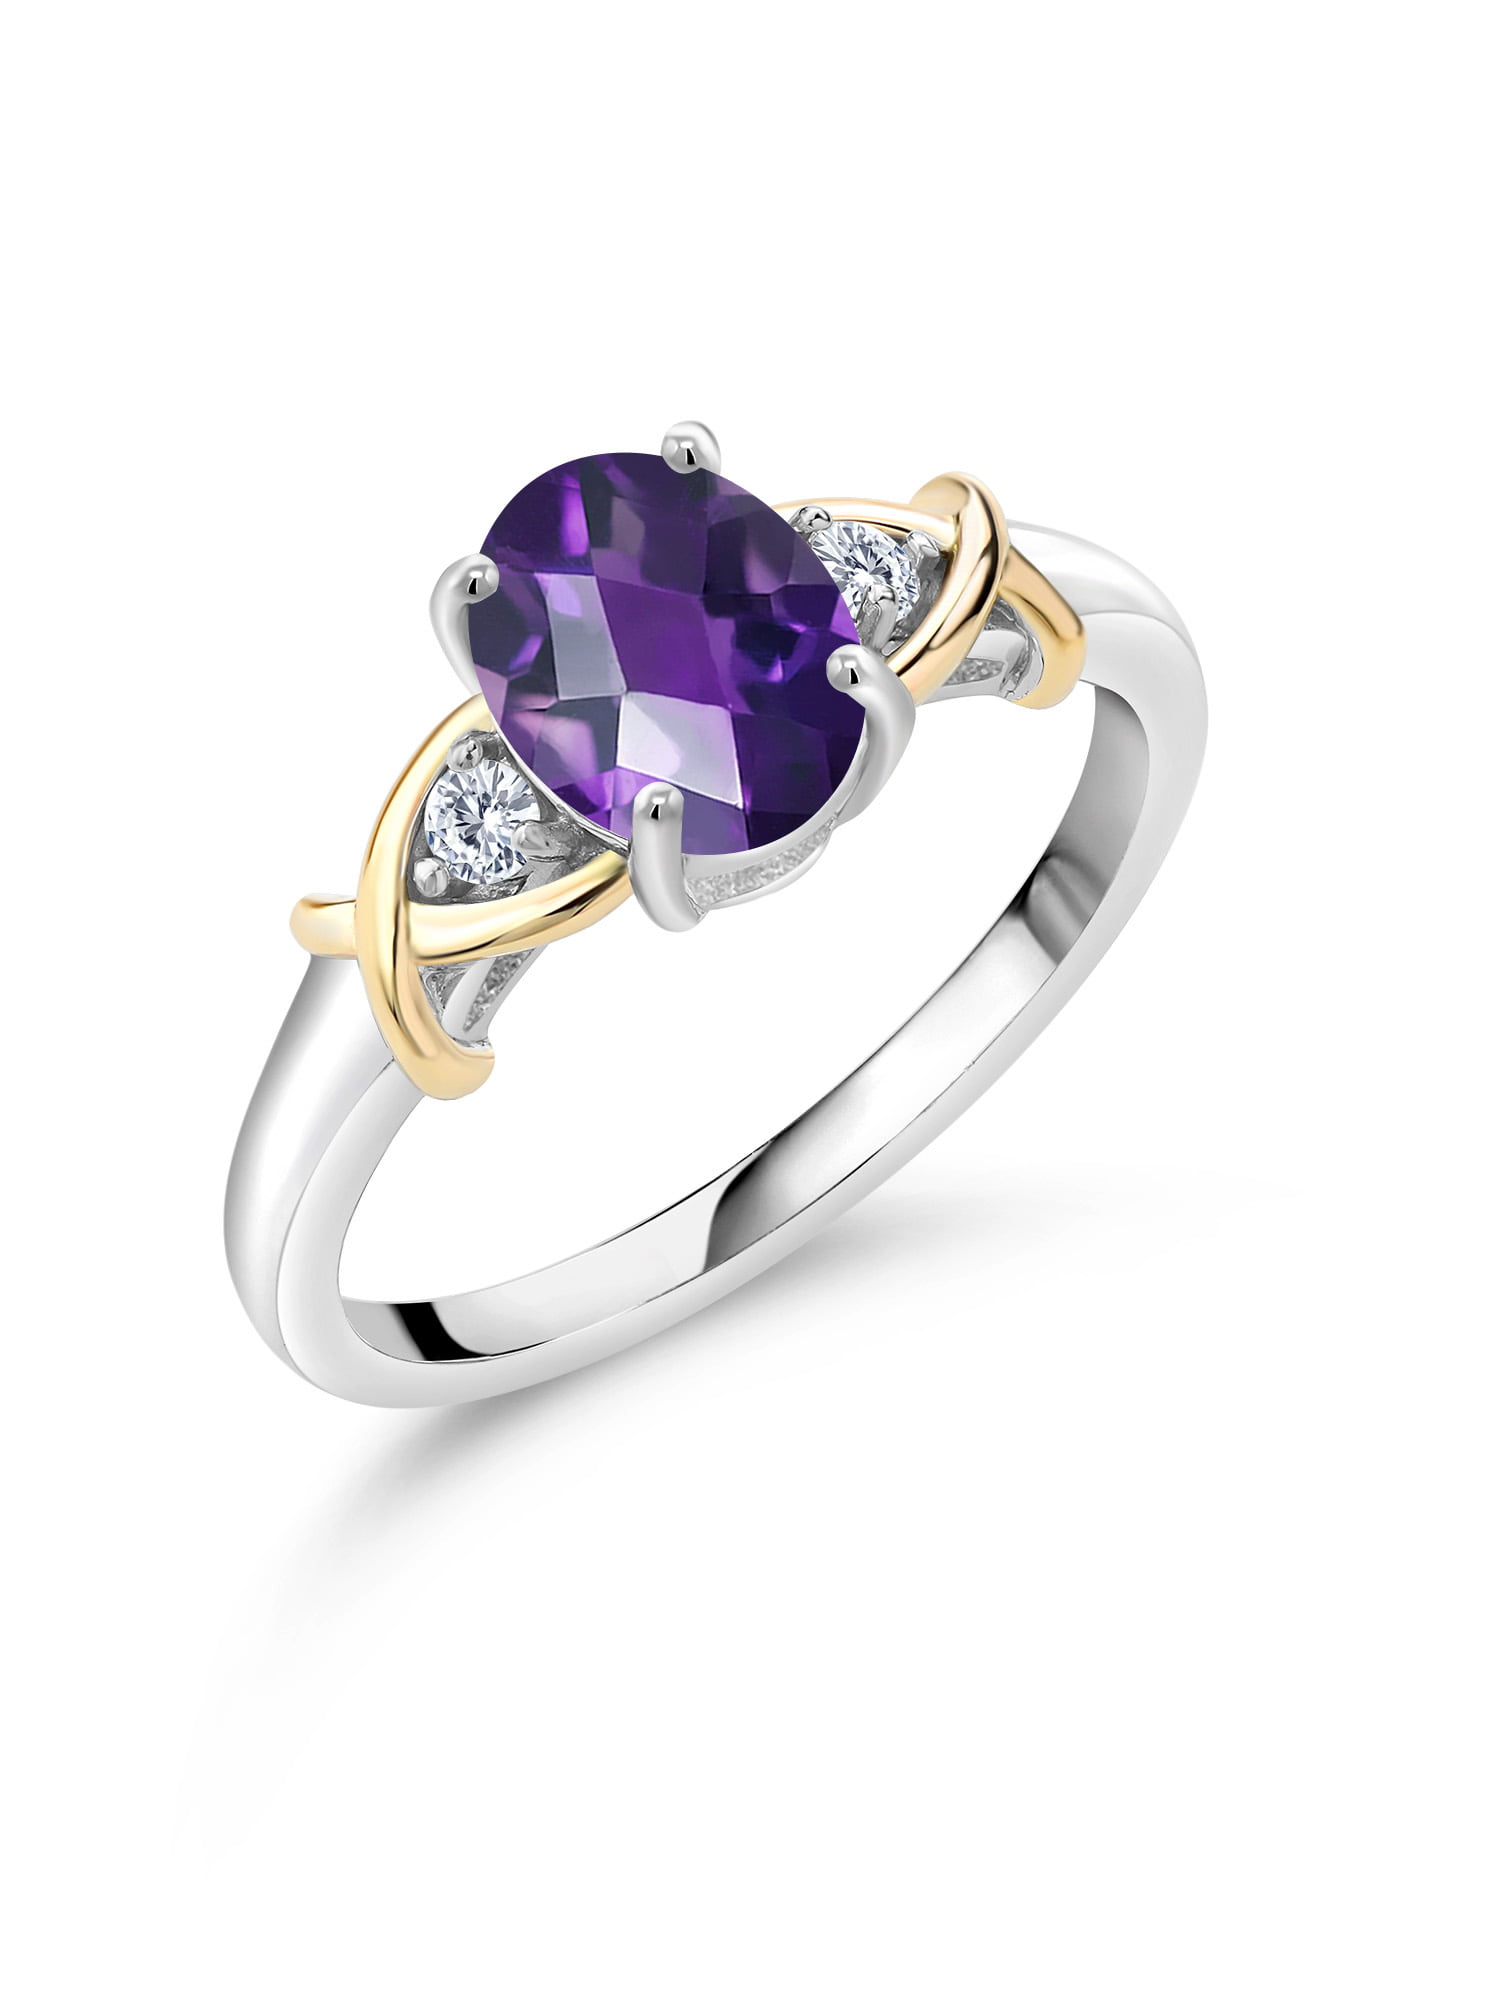 Gem Stone King 0.97 Ct Checkerboard Purple Amethyst White Created Sapphire 925 Silver Ring